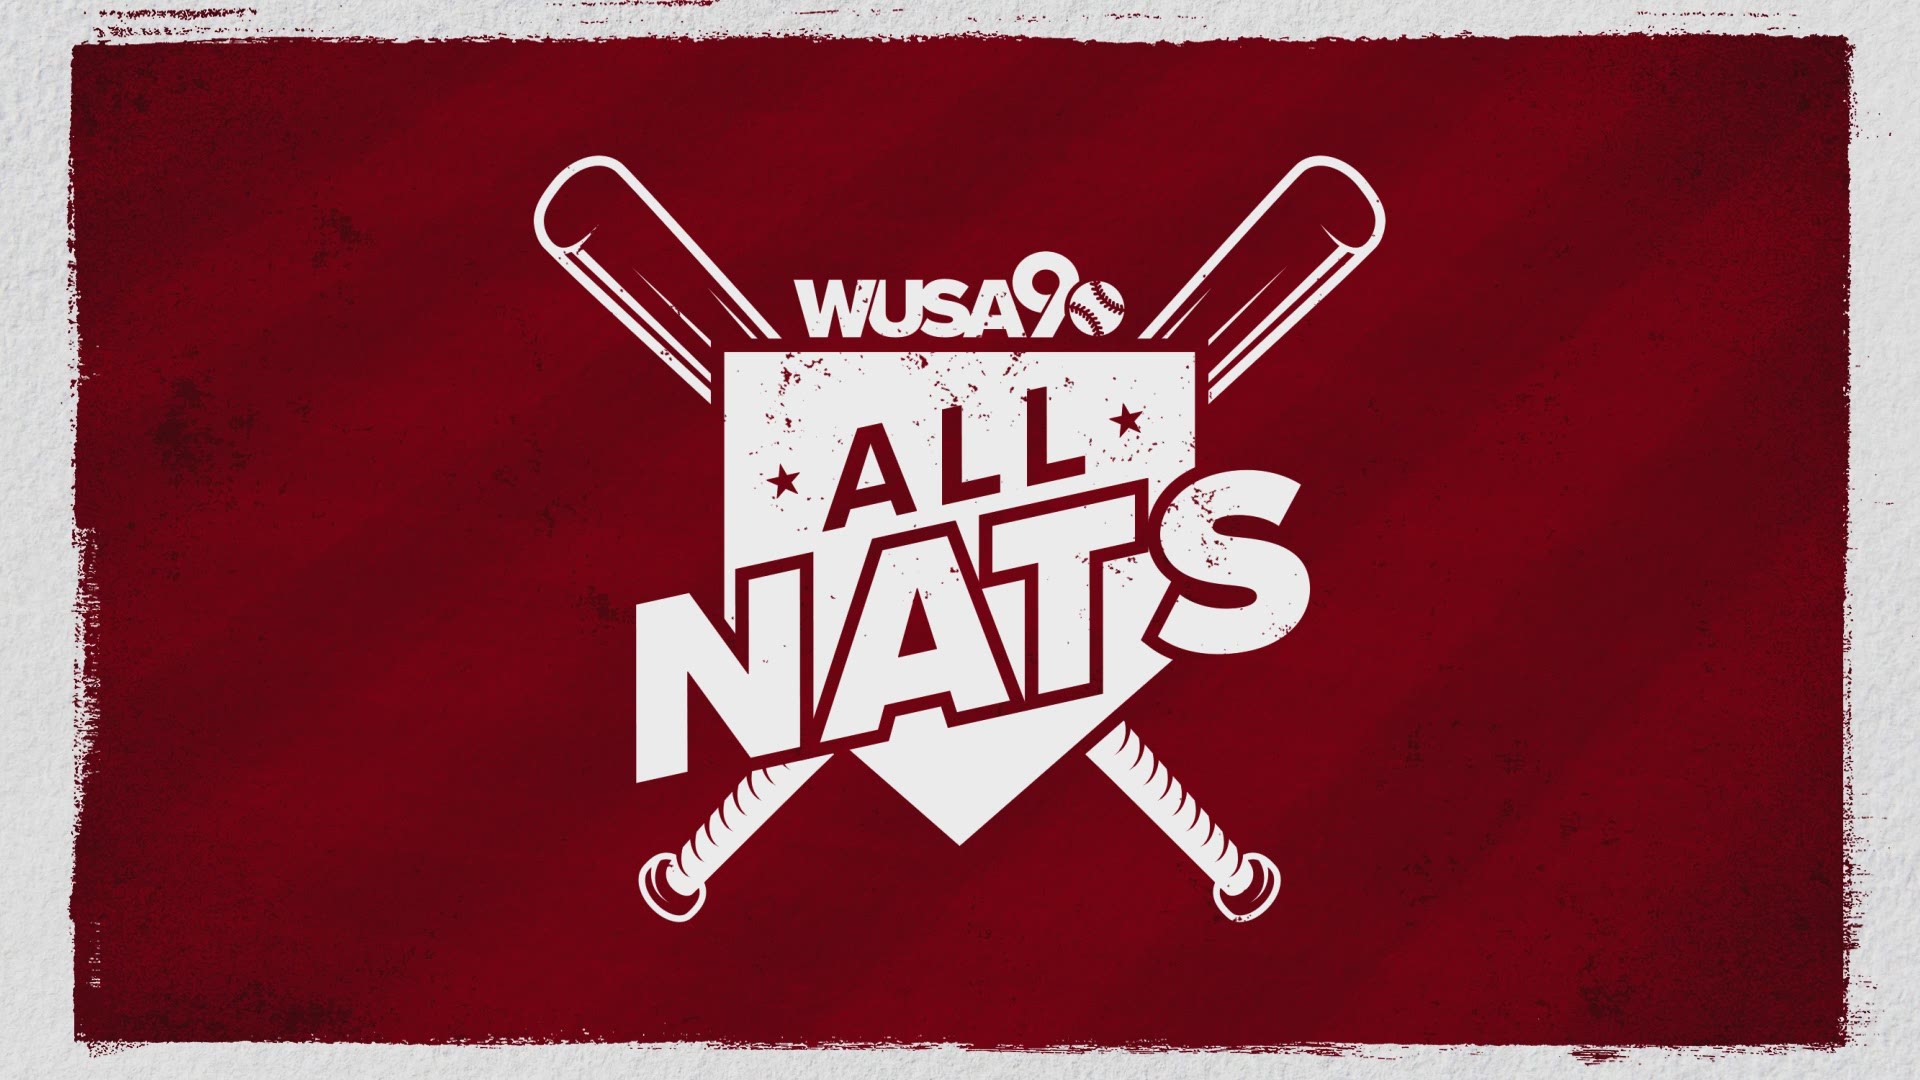 To celebrate the Washington Nationals World Series run, we produced a song about the team's signature dugout dances.